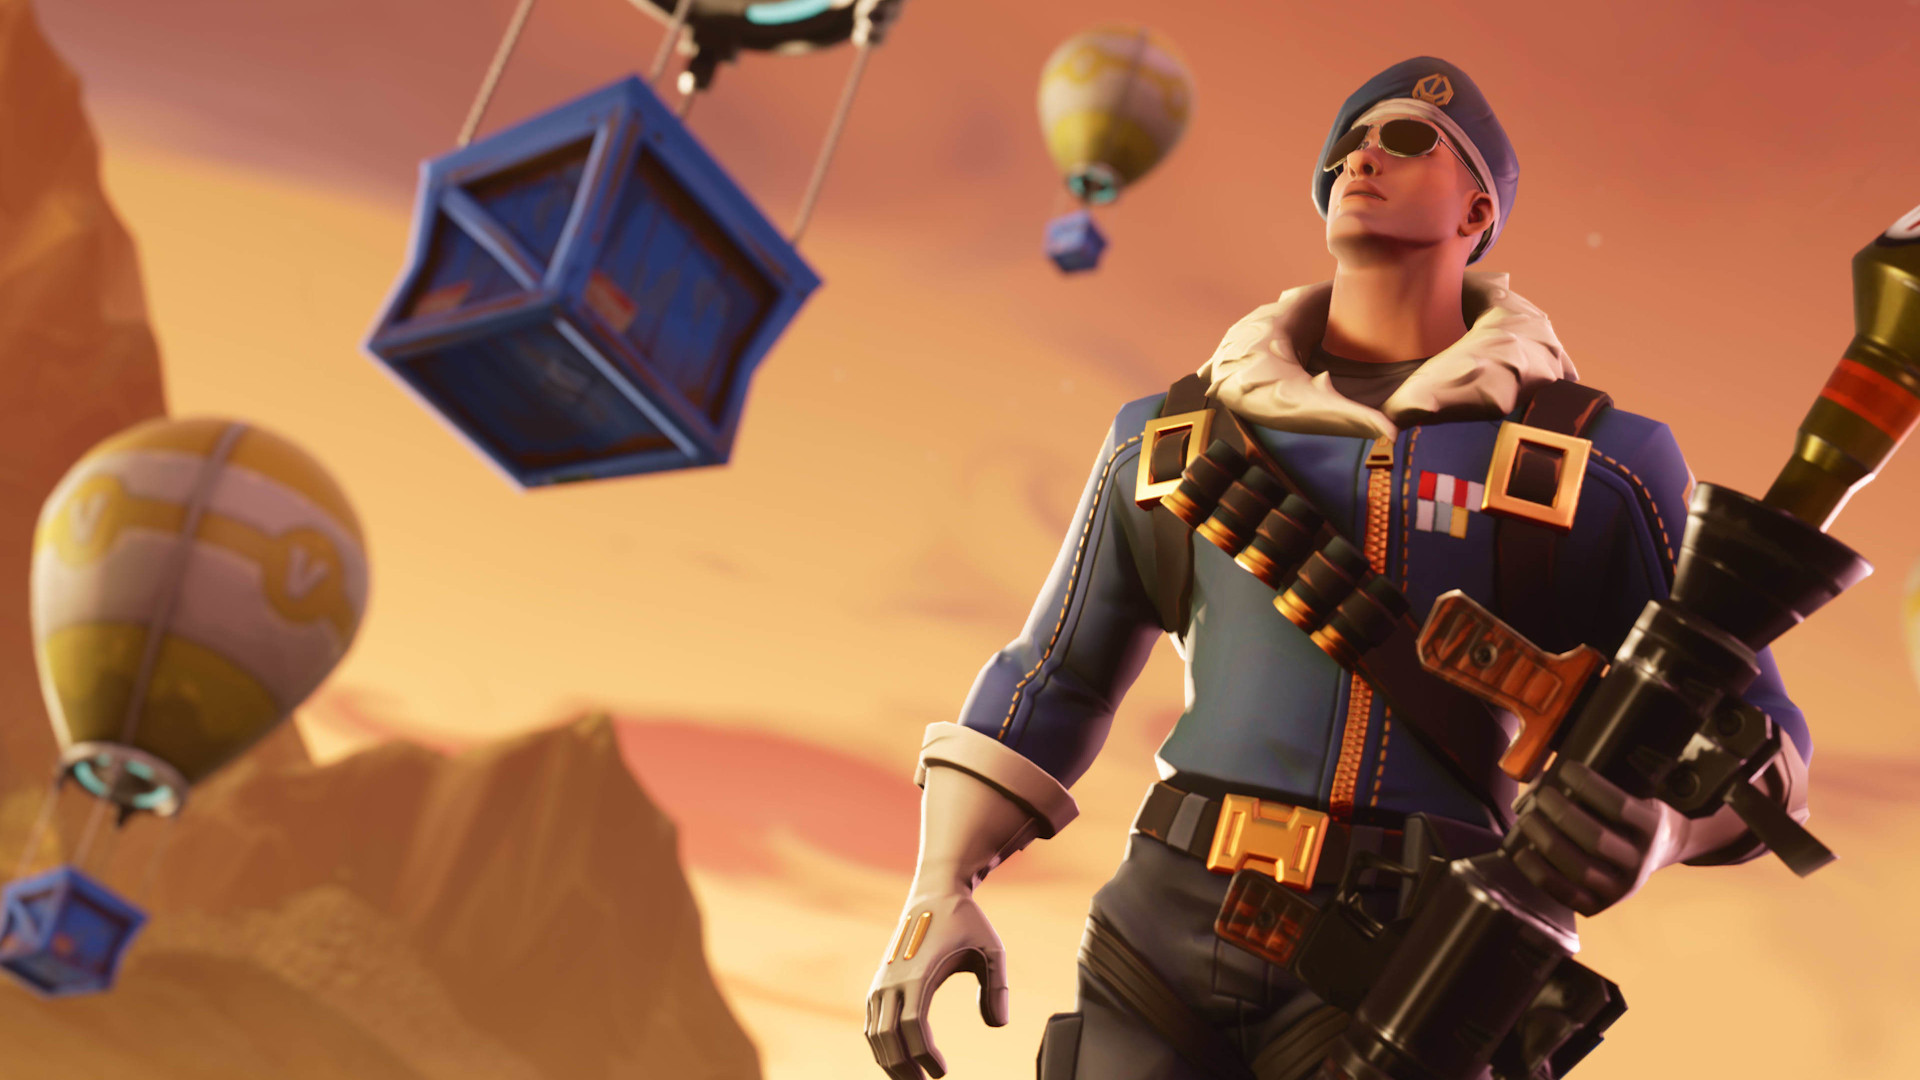 Rarest Fortnite skins: The Royale Bomber holding a rocket and looking up towards the sky, with several hot air balloon crates in the background.